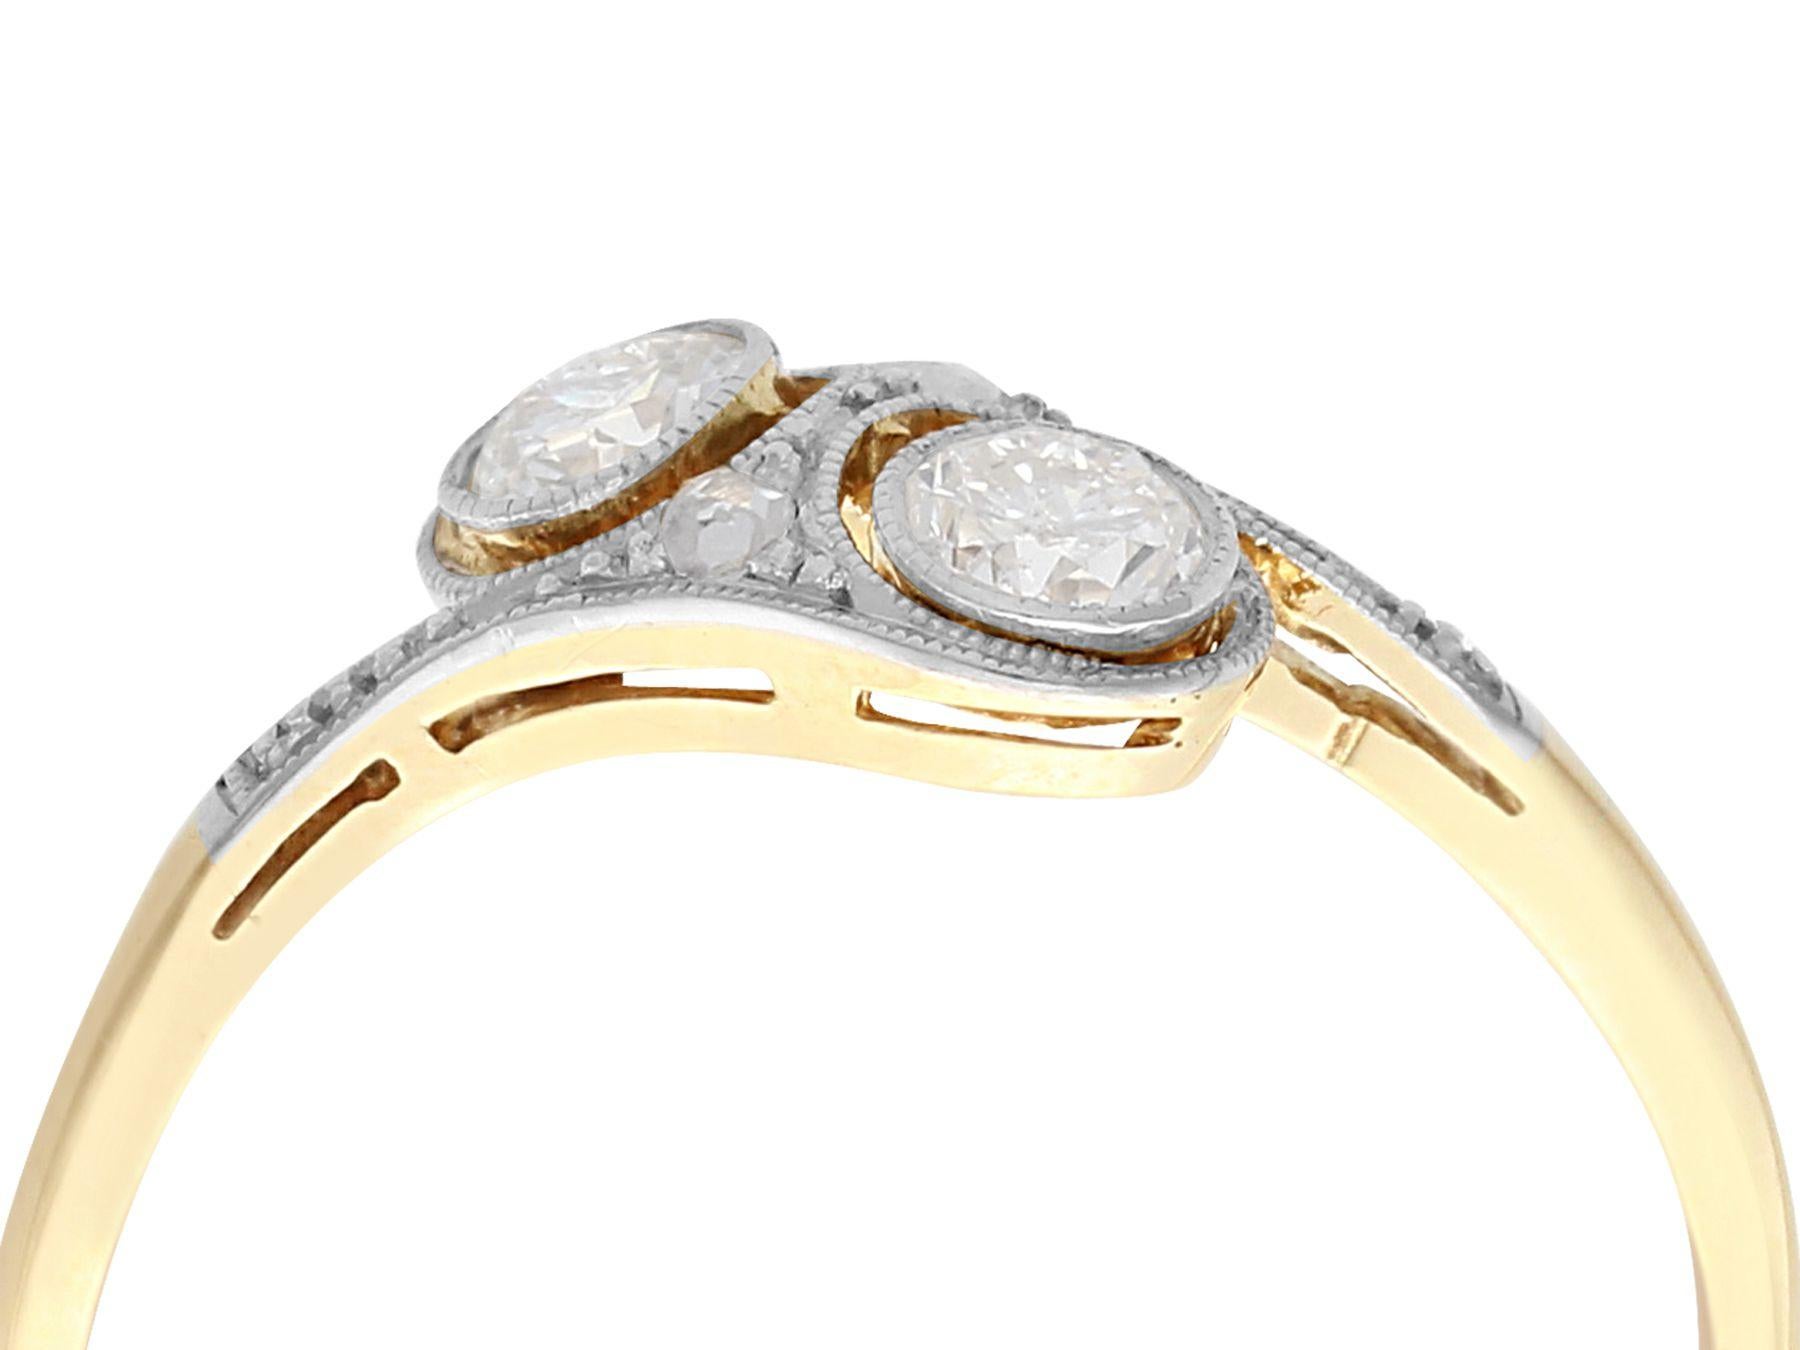 An impressive antique 0.40 carat diamond and 14 karat yellow gold, 14 karat white gold twist style cocktail ring; part of our diverse antique jewelry and estate jewelry collections.

This fine and impressive antique diamond twist ring has been